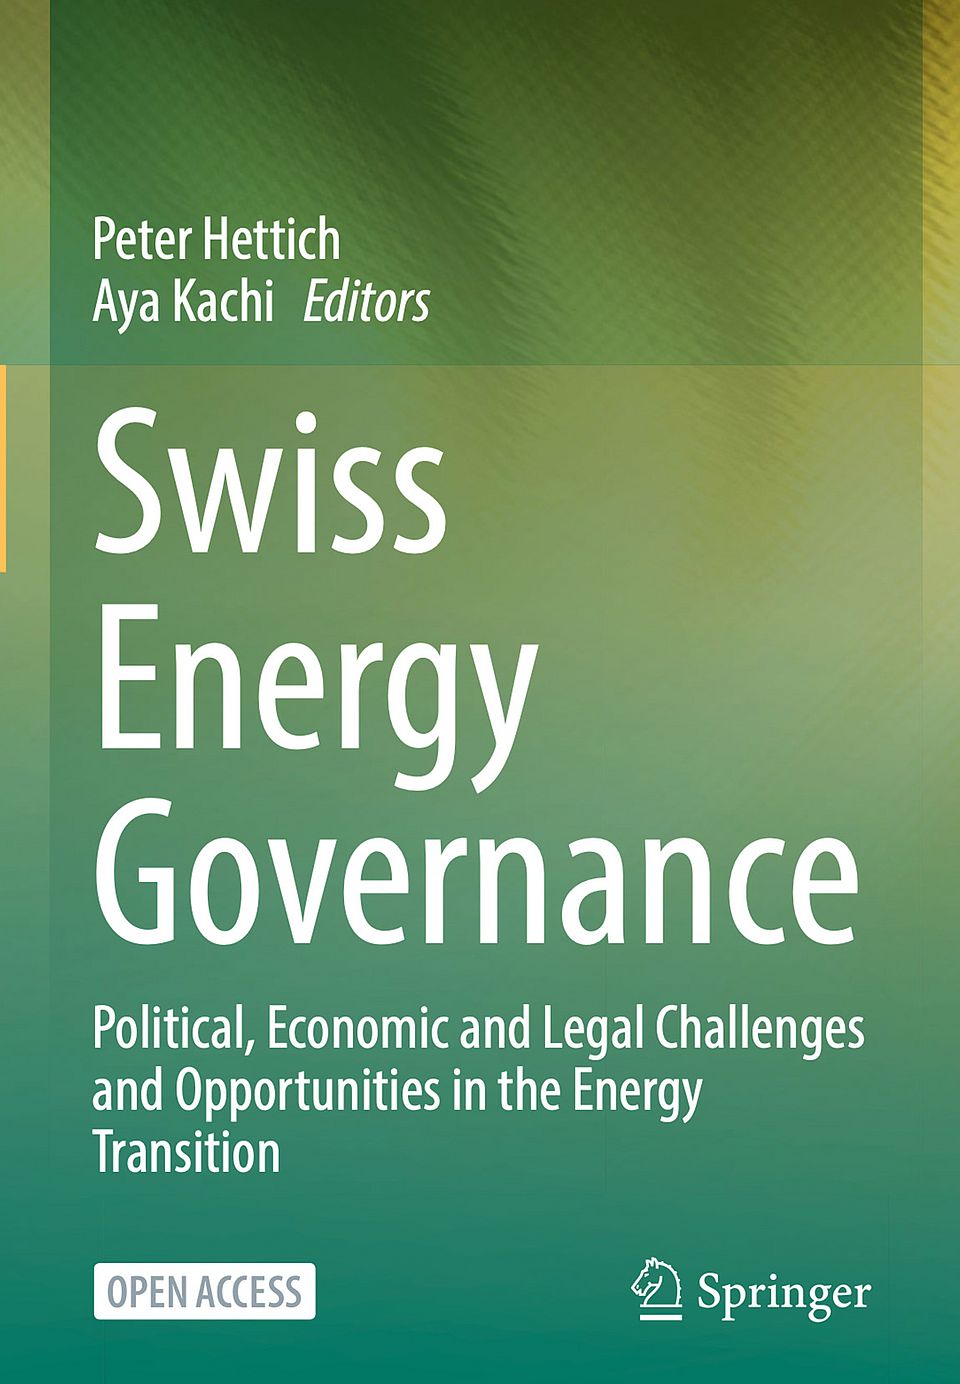 Swiss Energy Governance: Political, Economic and Legal Challenges and Opportunities in the Energy Transition